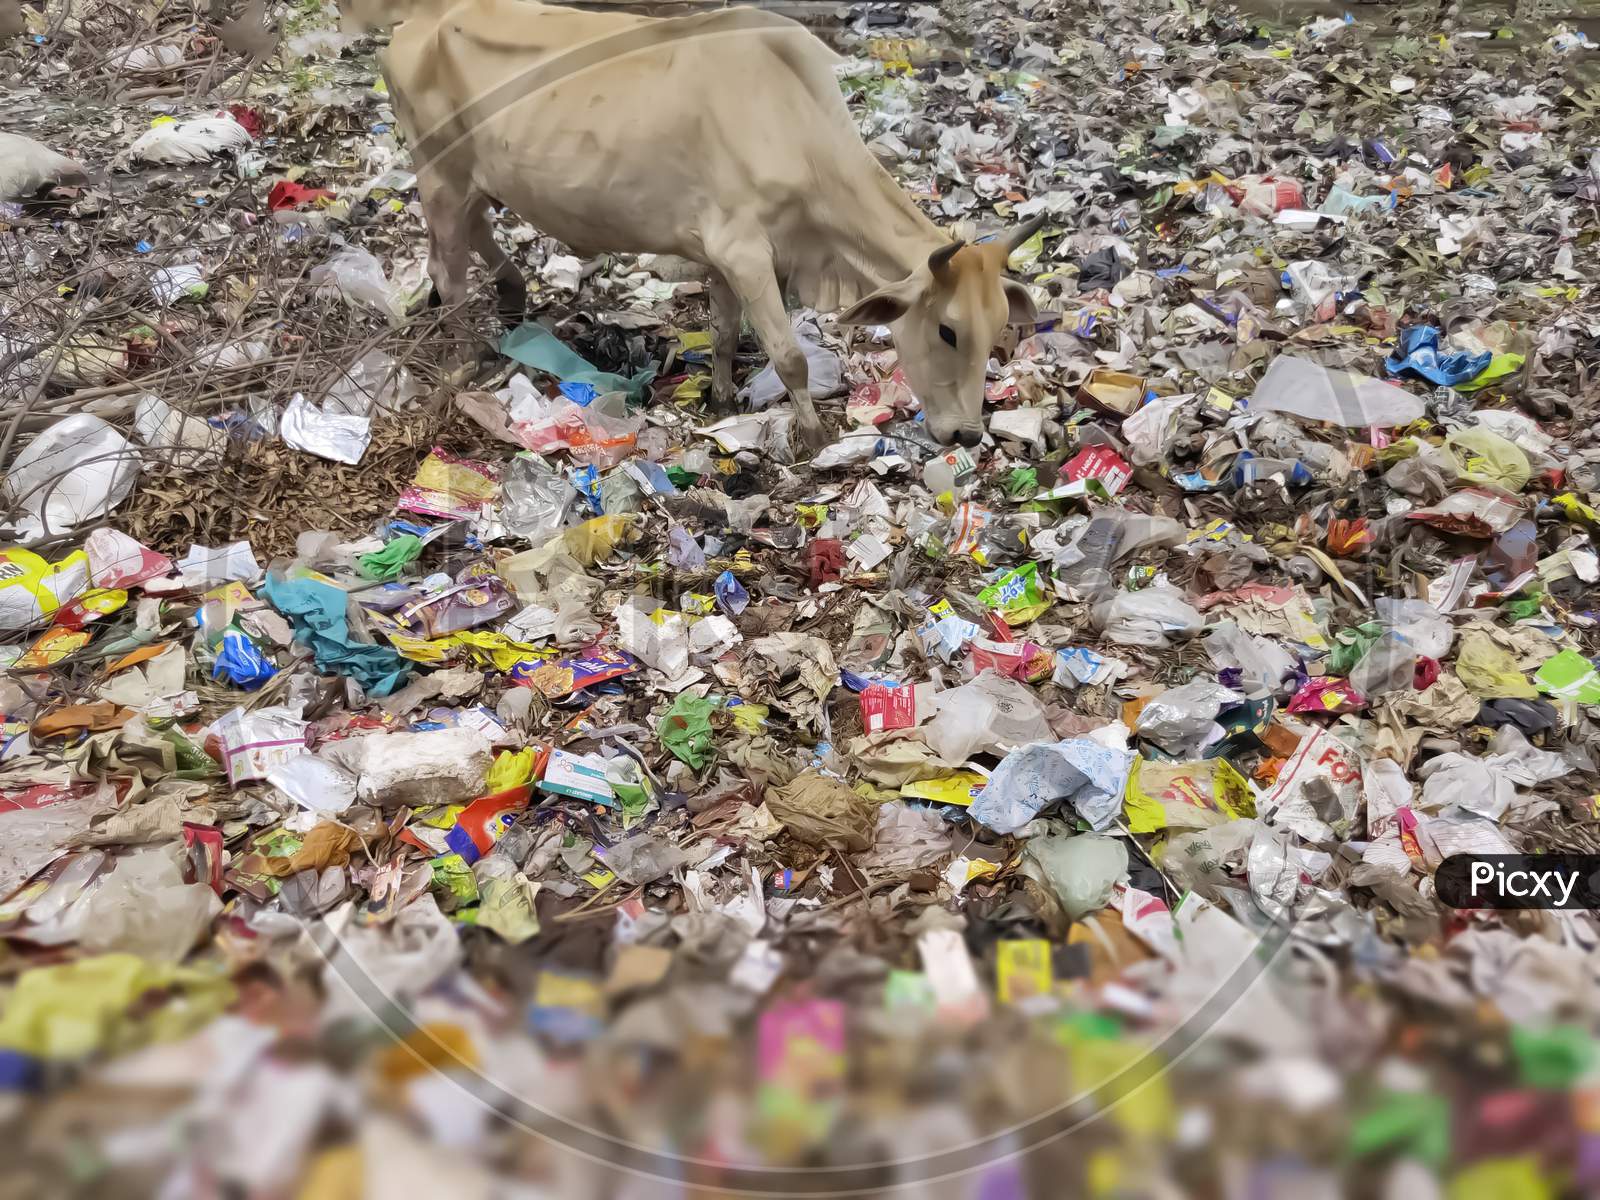 Say no to plastic pollution. The cow is eating plastic waste.